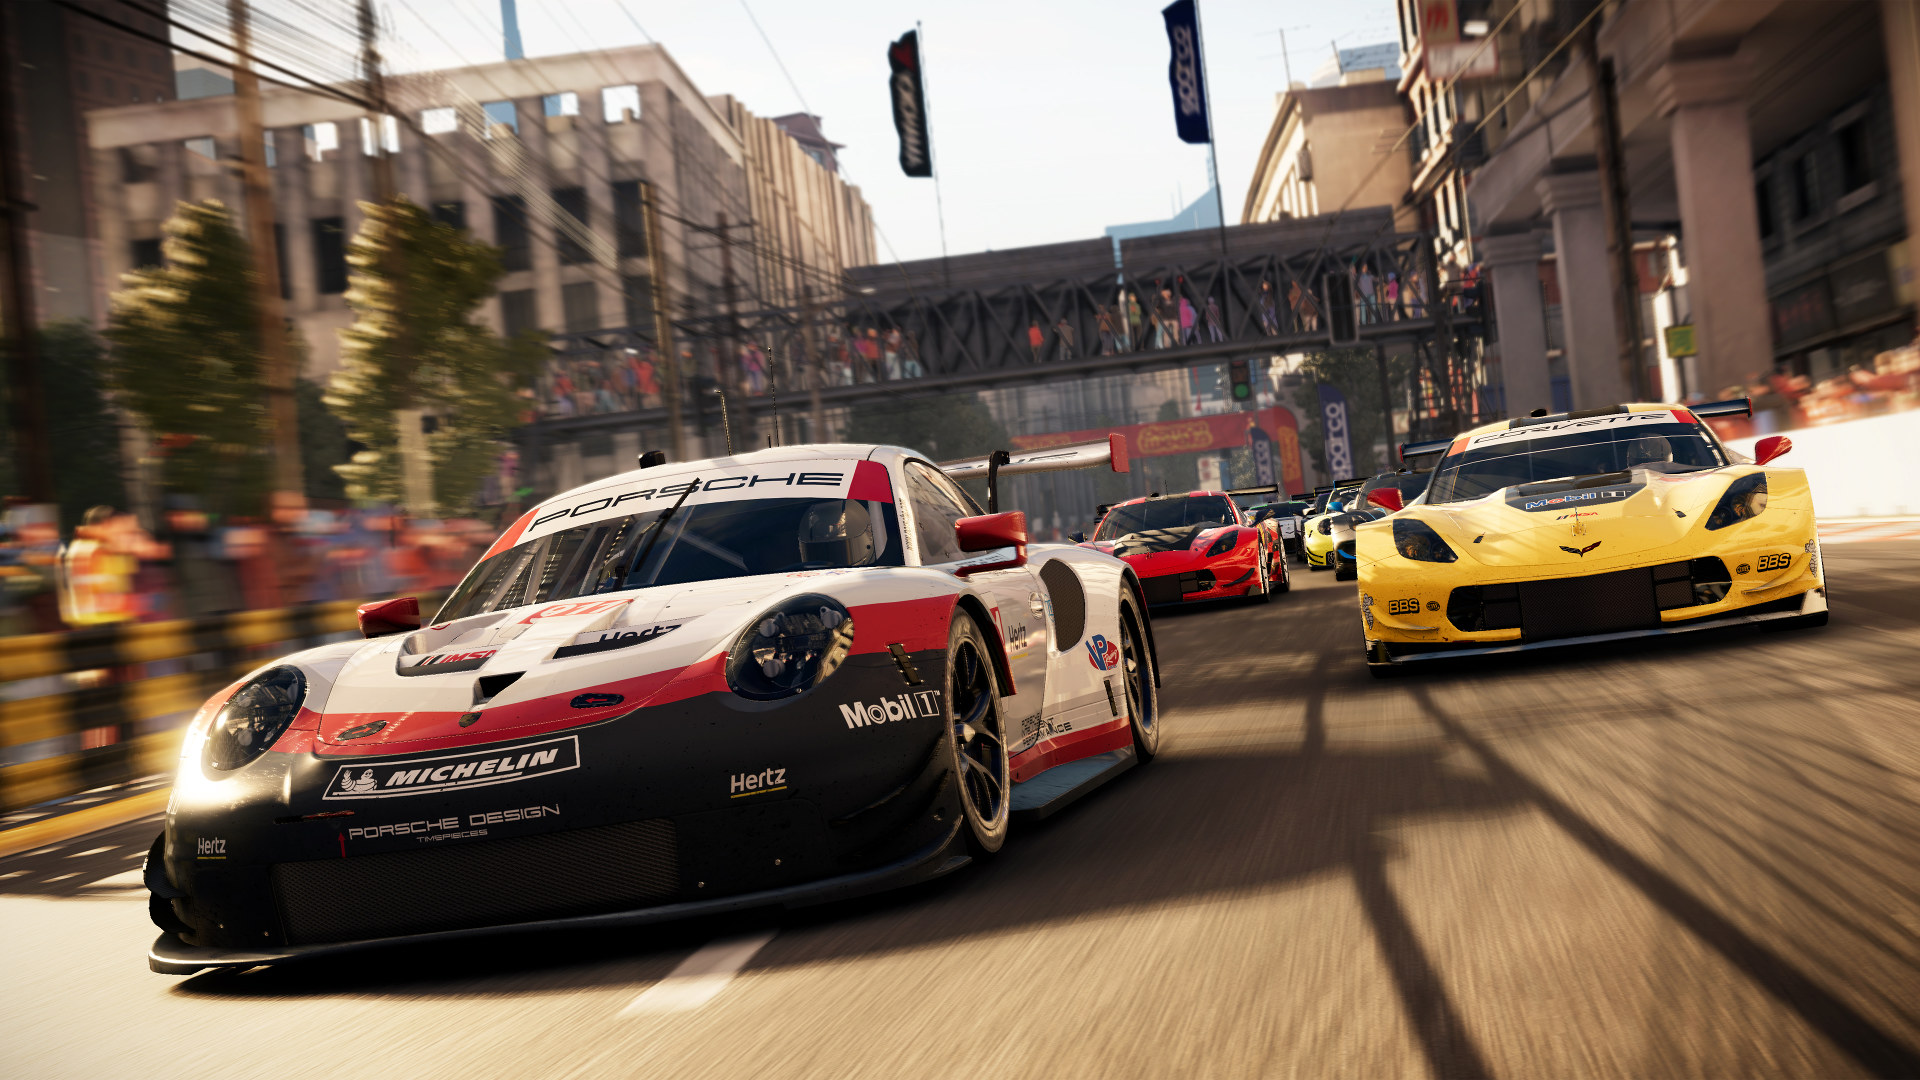 race driver grid on steam